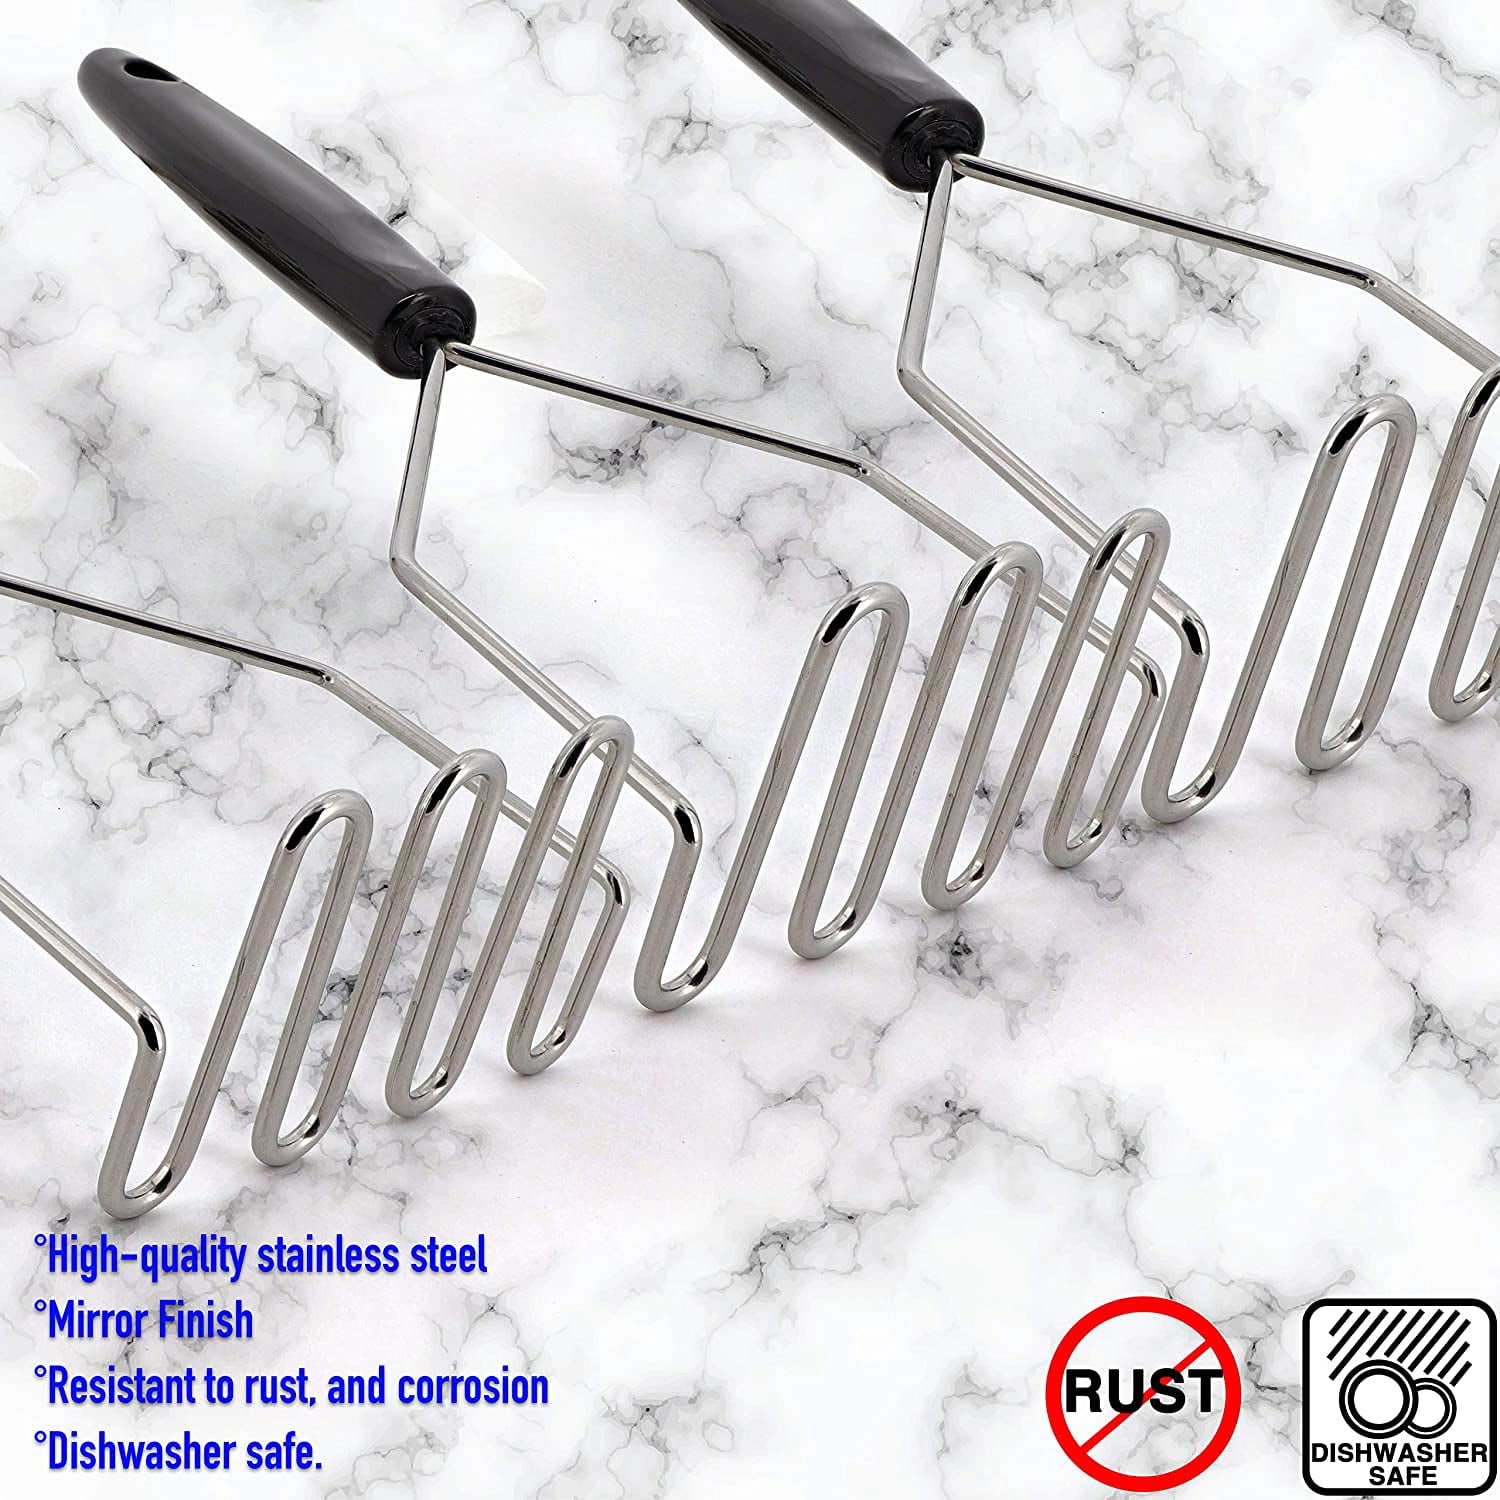 Potato Masher, Potato Smasher Stainless Steel Wire Masher & Scraper Wire  Head Utensil Masher Hand Tool with Long Handle Perfect for Mashing